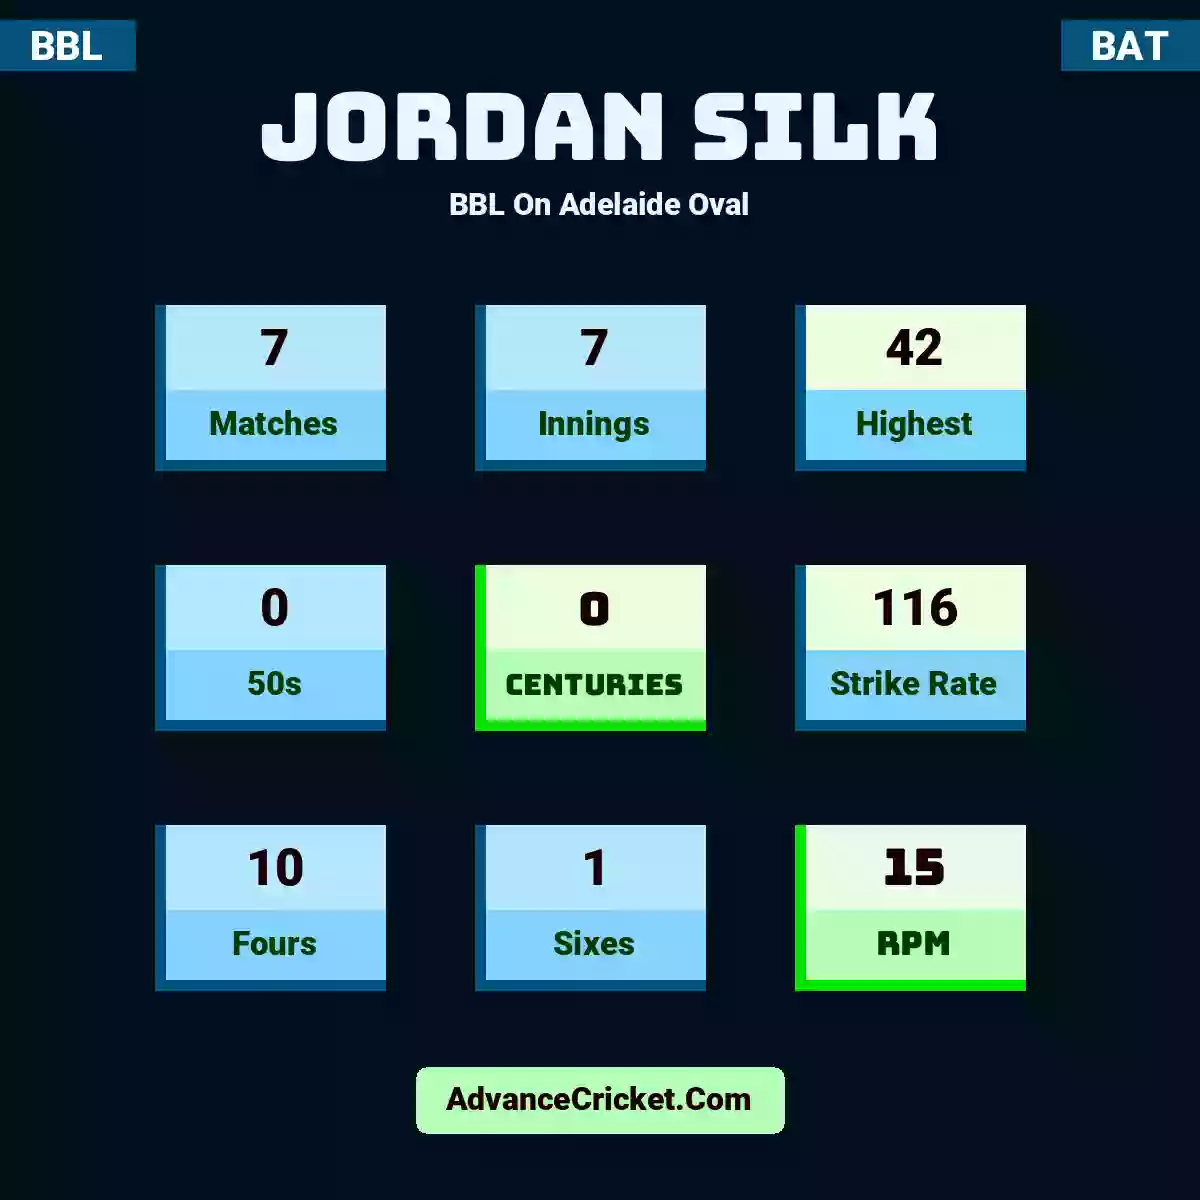 Jordan Silk BBL  On Adelaide Oval, Jordan Silk played 7 matches, scored 42 runs as highest, 0 half-centuries, and 0 centuries, with a strike rate of 116. J.Silk hit 10 fours and 1 sixes, with an RPM of 15.